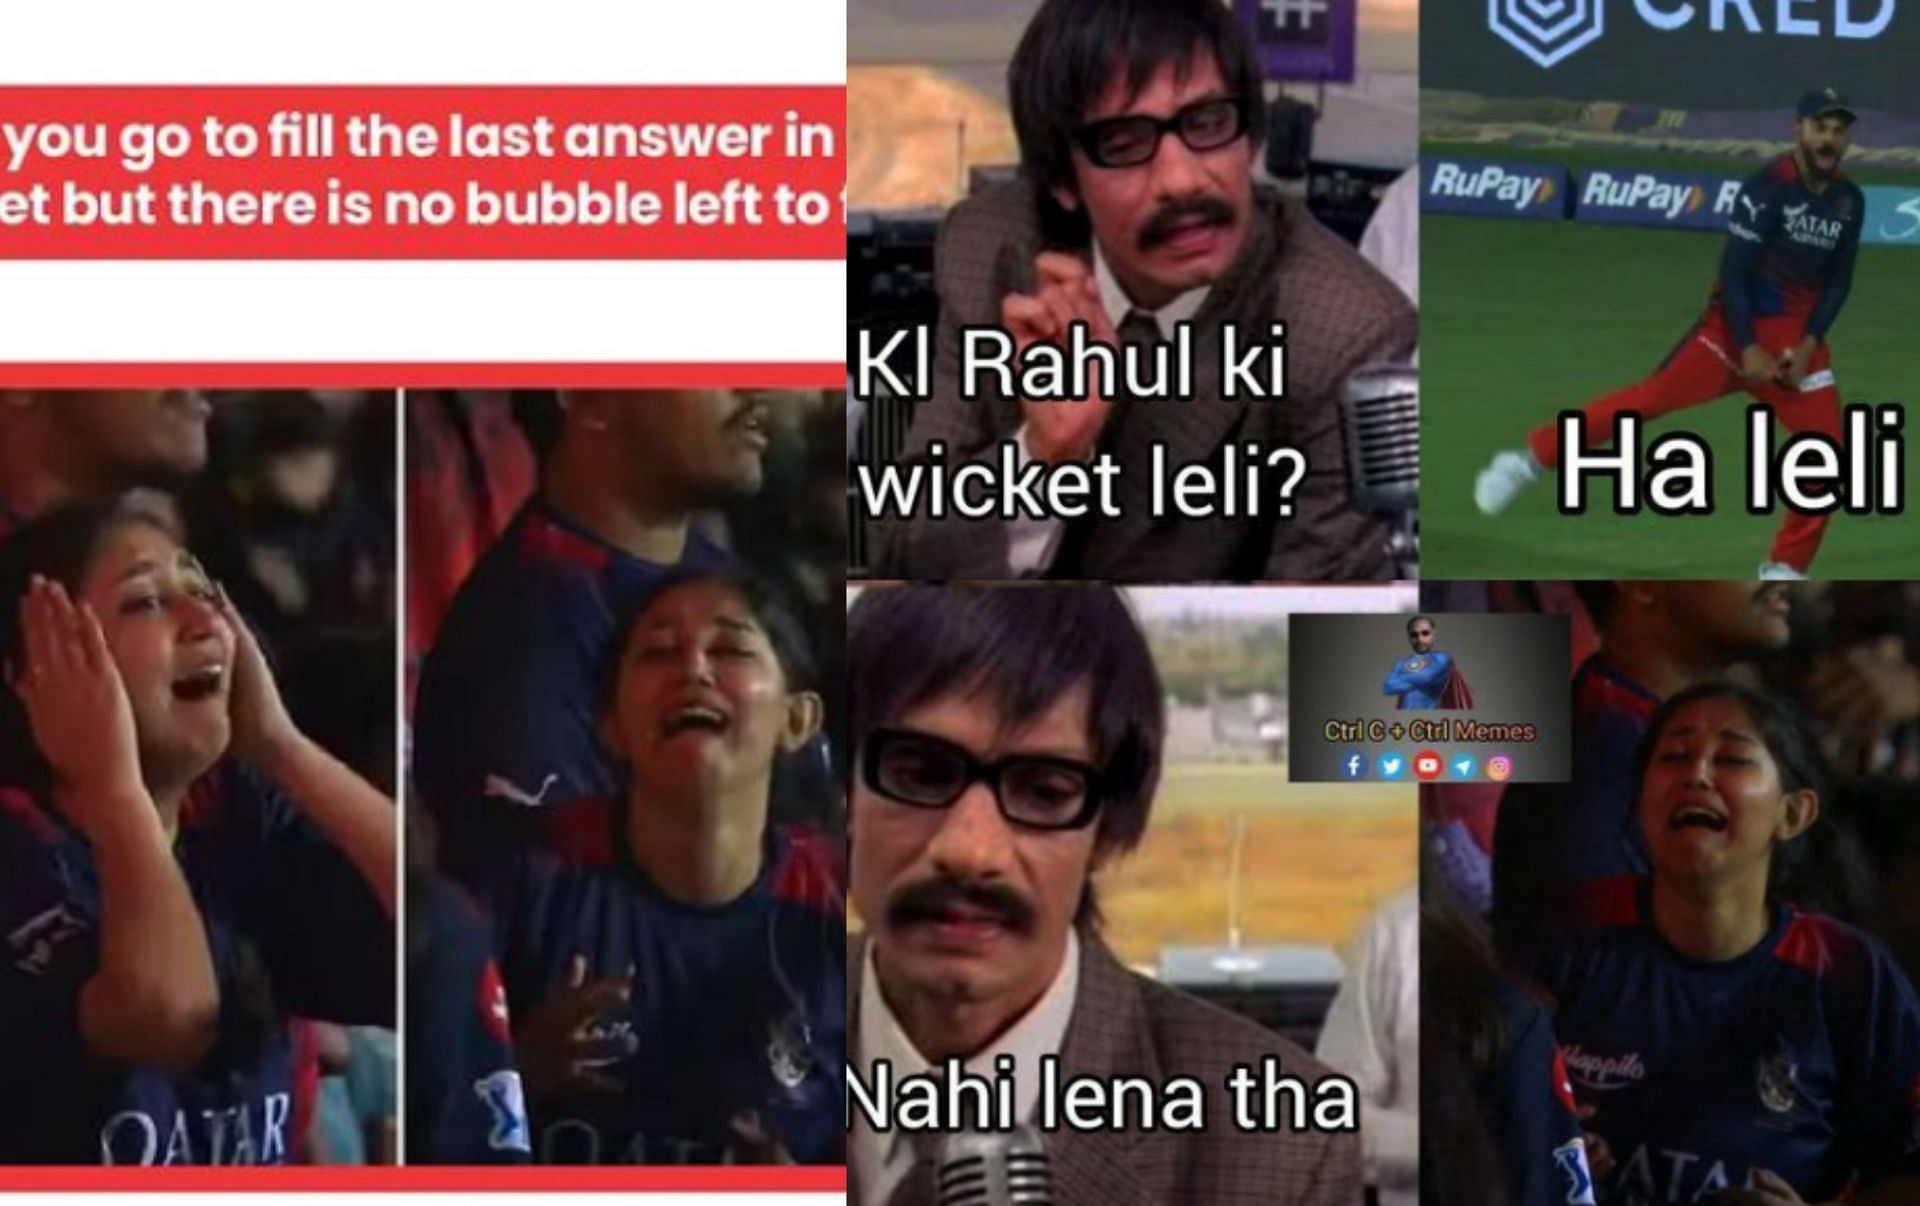 Memes surface after an RCB fan got emotional on Monday night after RCB